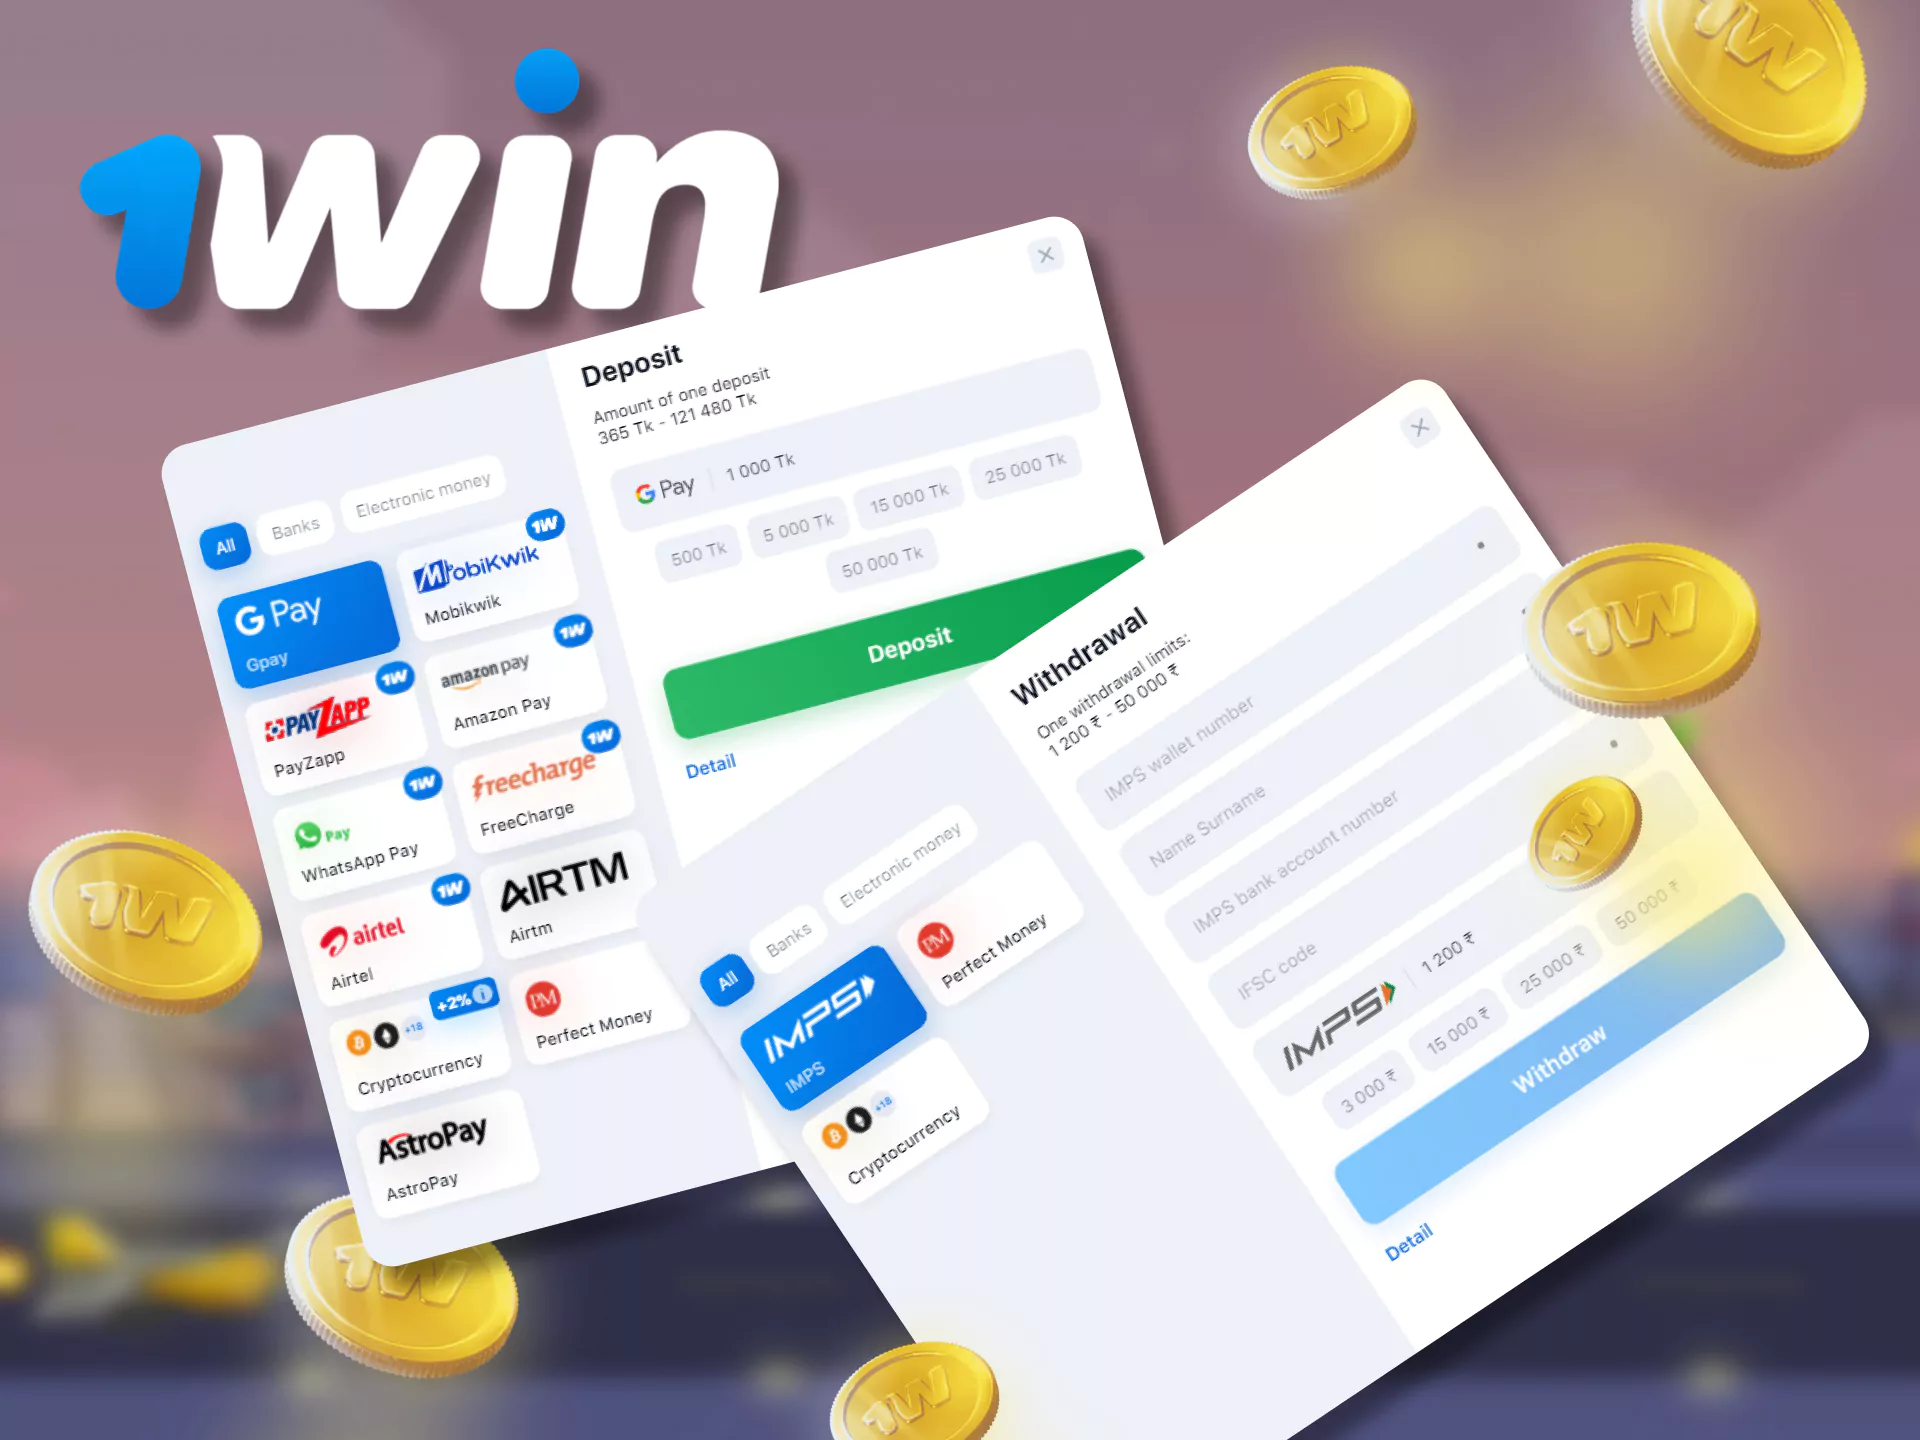 At 1Win you can easily deposit or withdraw your winnings.